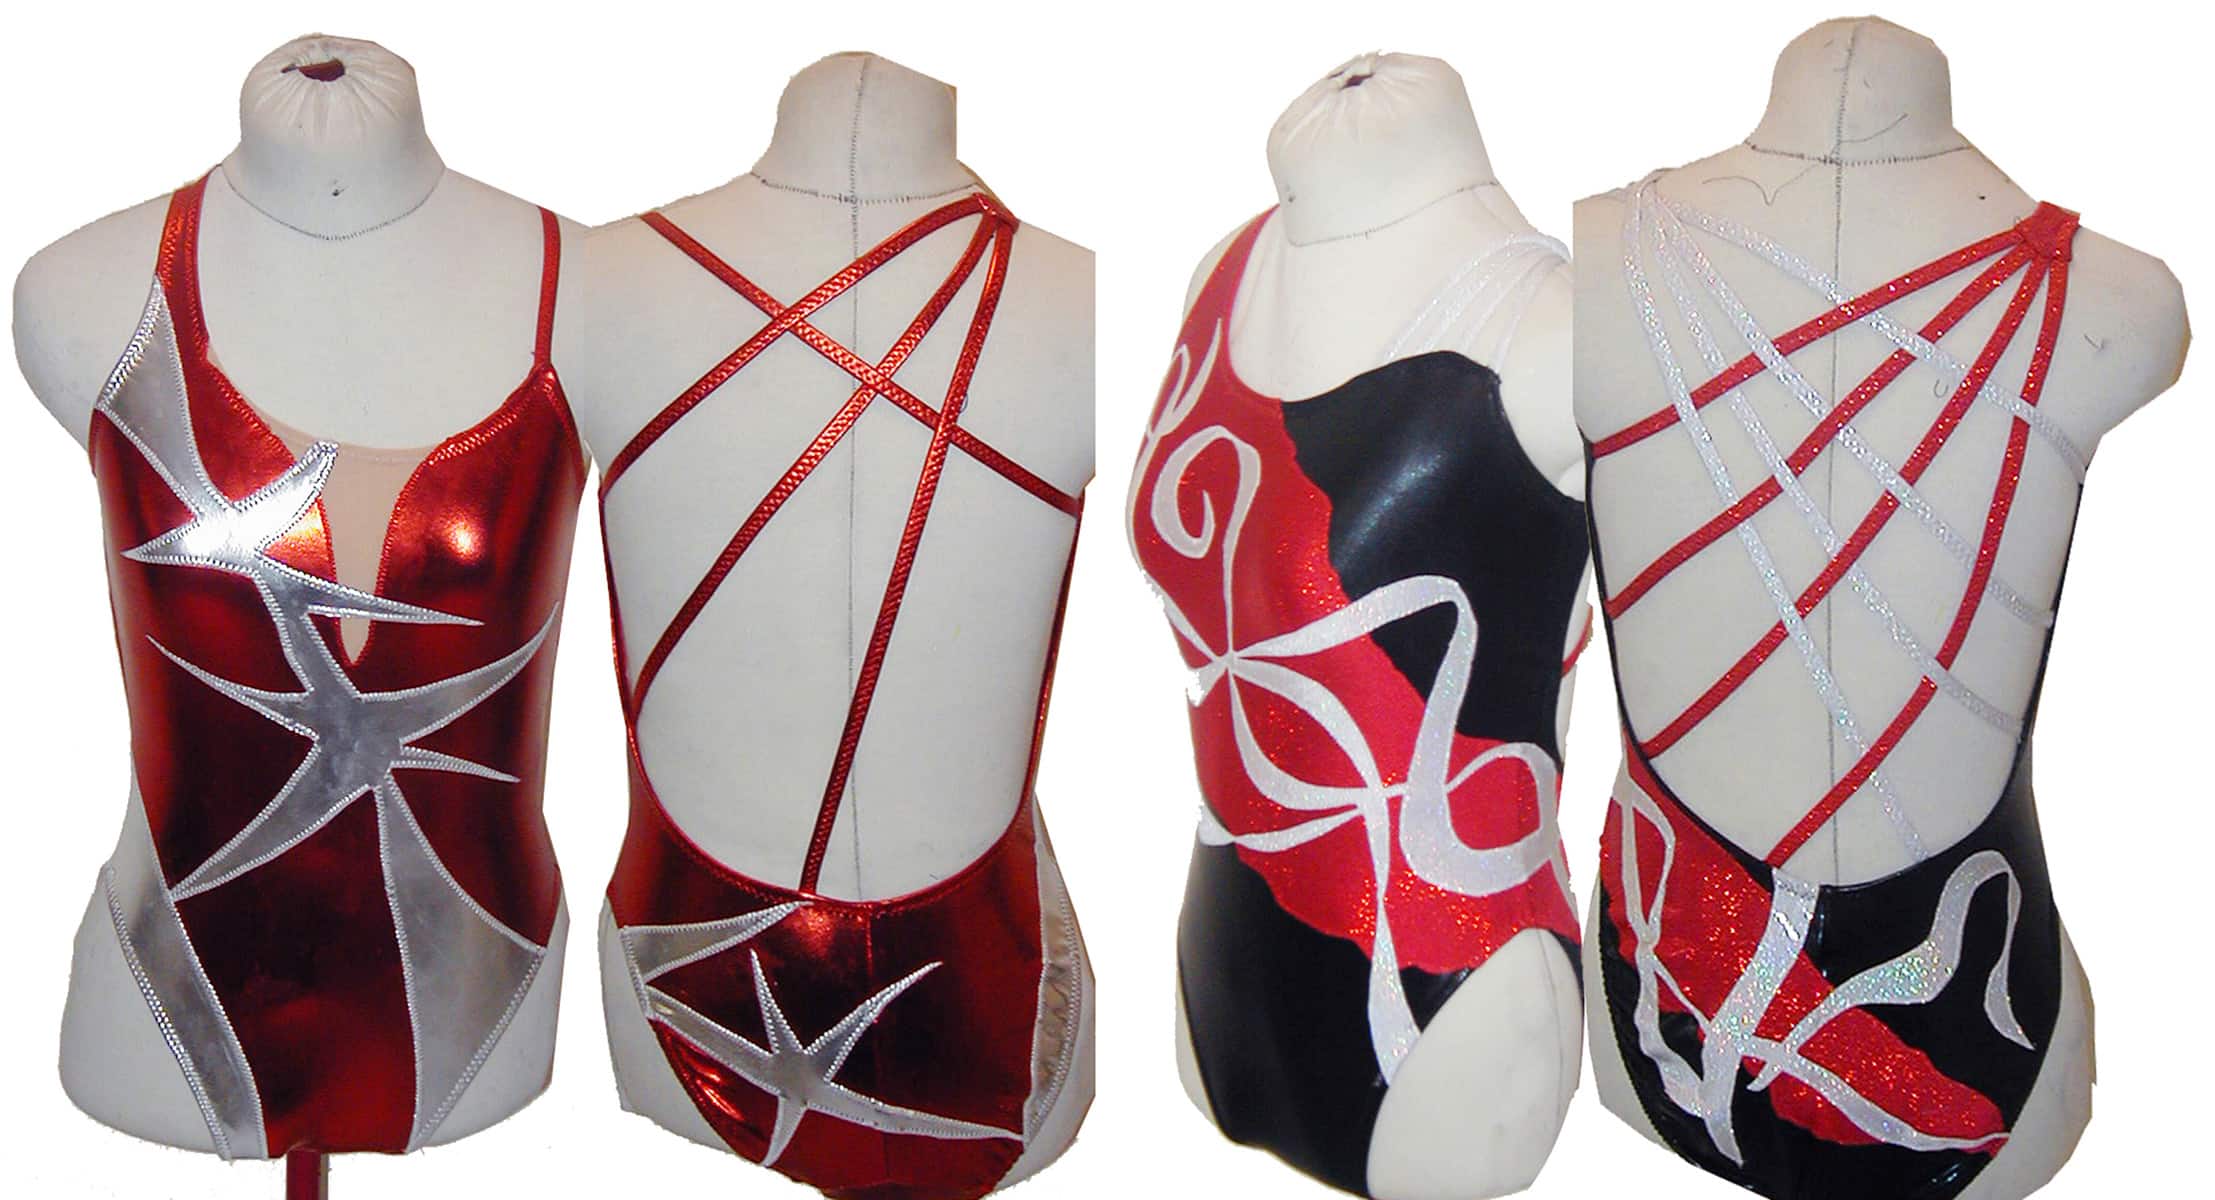 Front and back views of two synchro swim suits. One is red and white, the other is red, black, and white. Both have mutiple crossover straps.